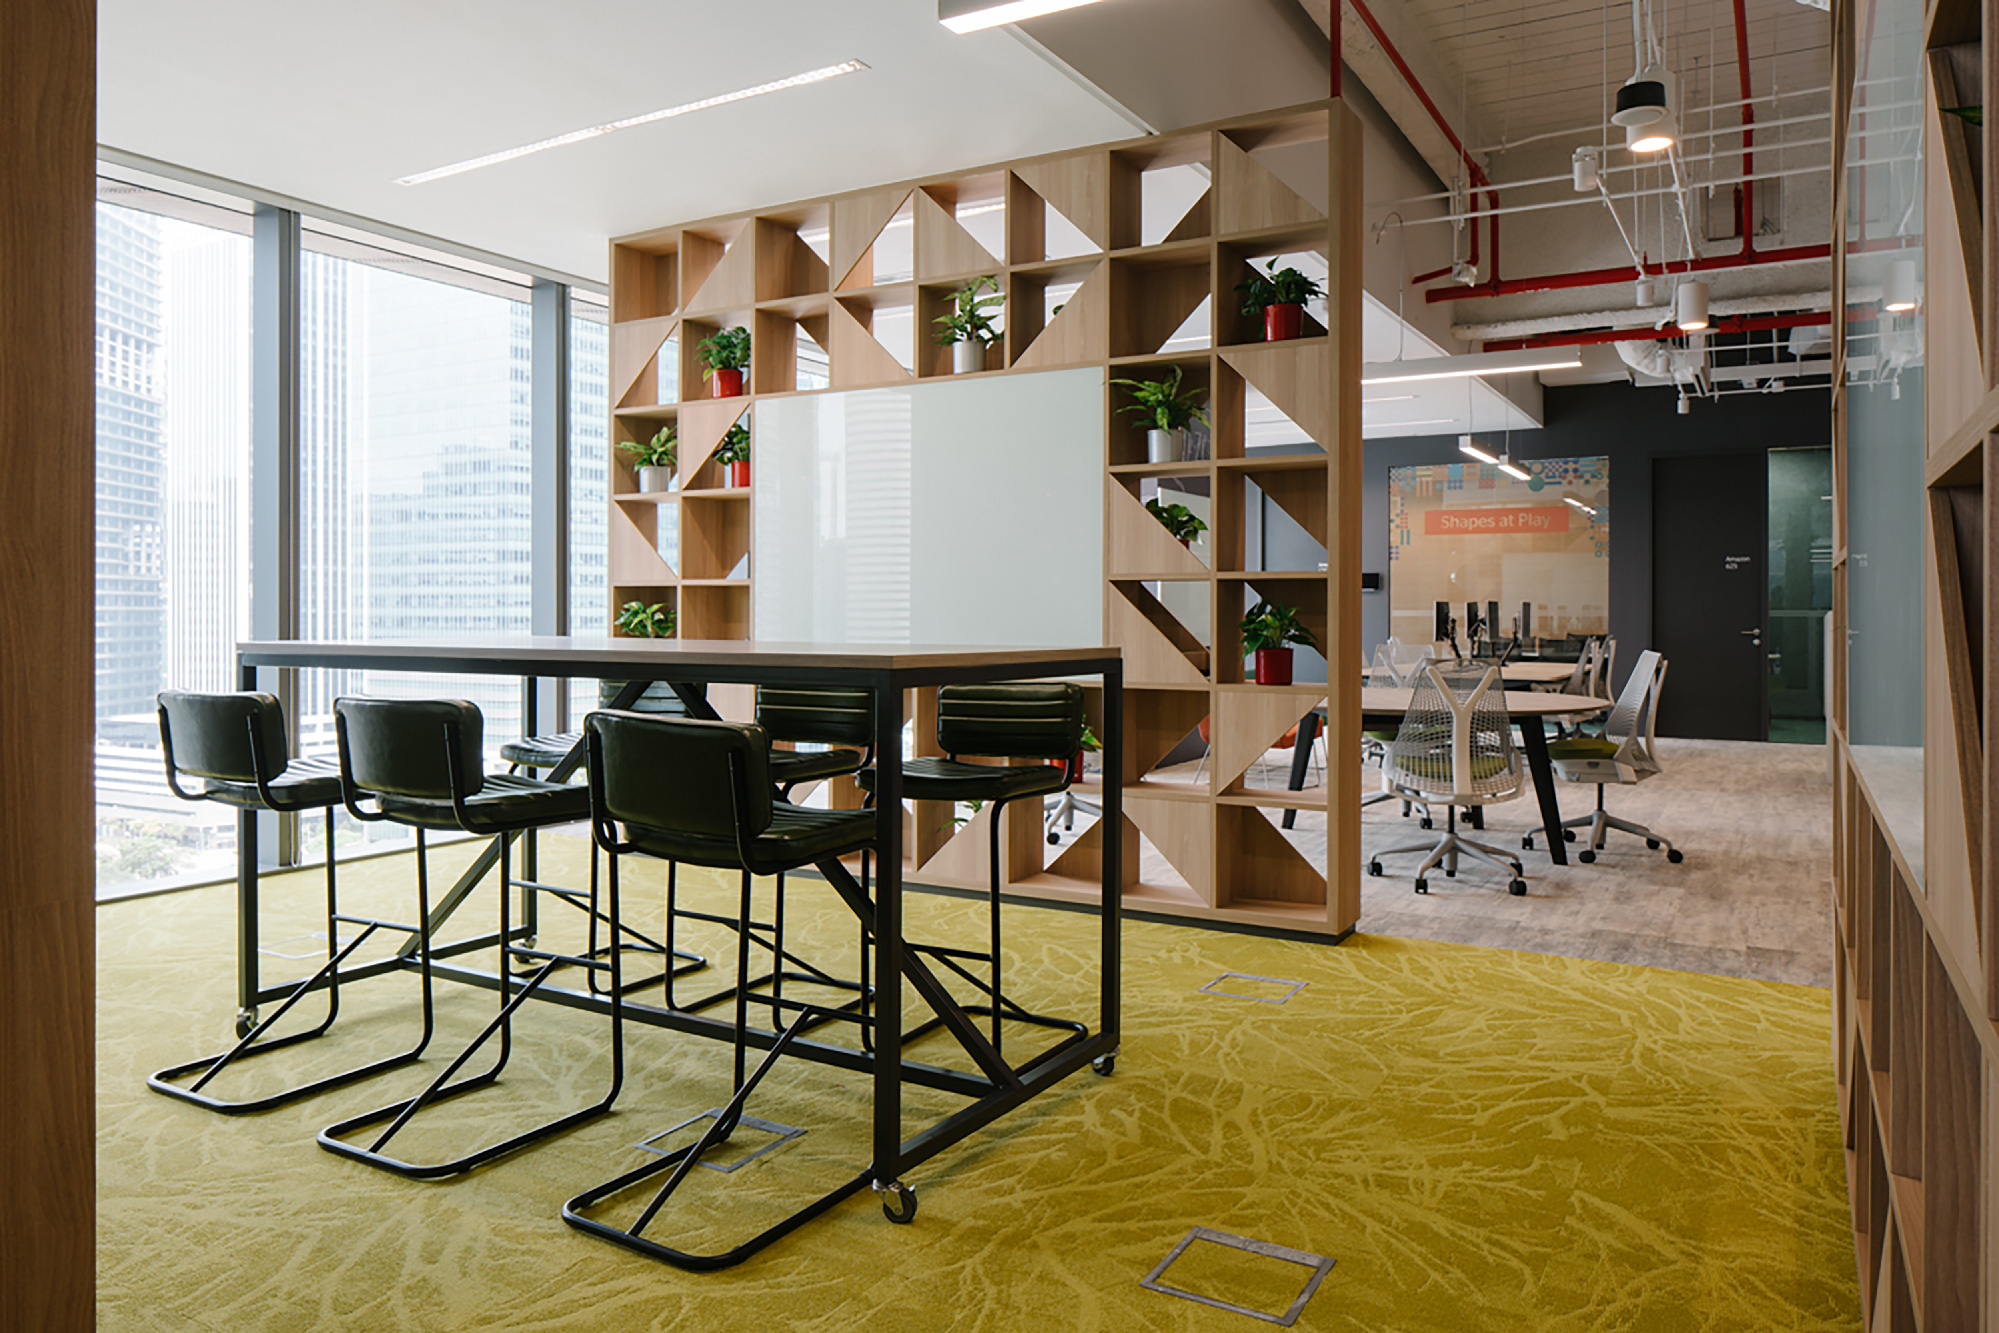 Prudential Singapore office: inclusivity at workplace
